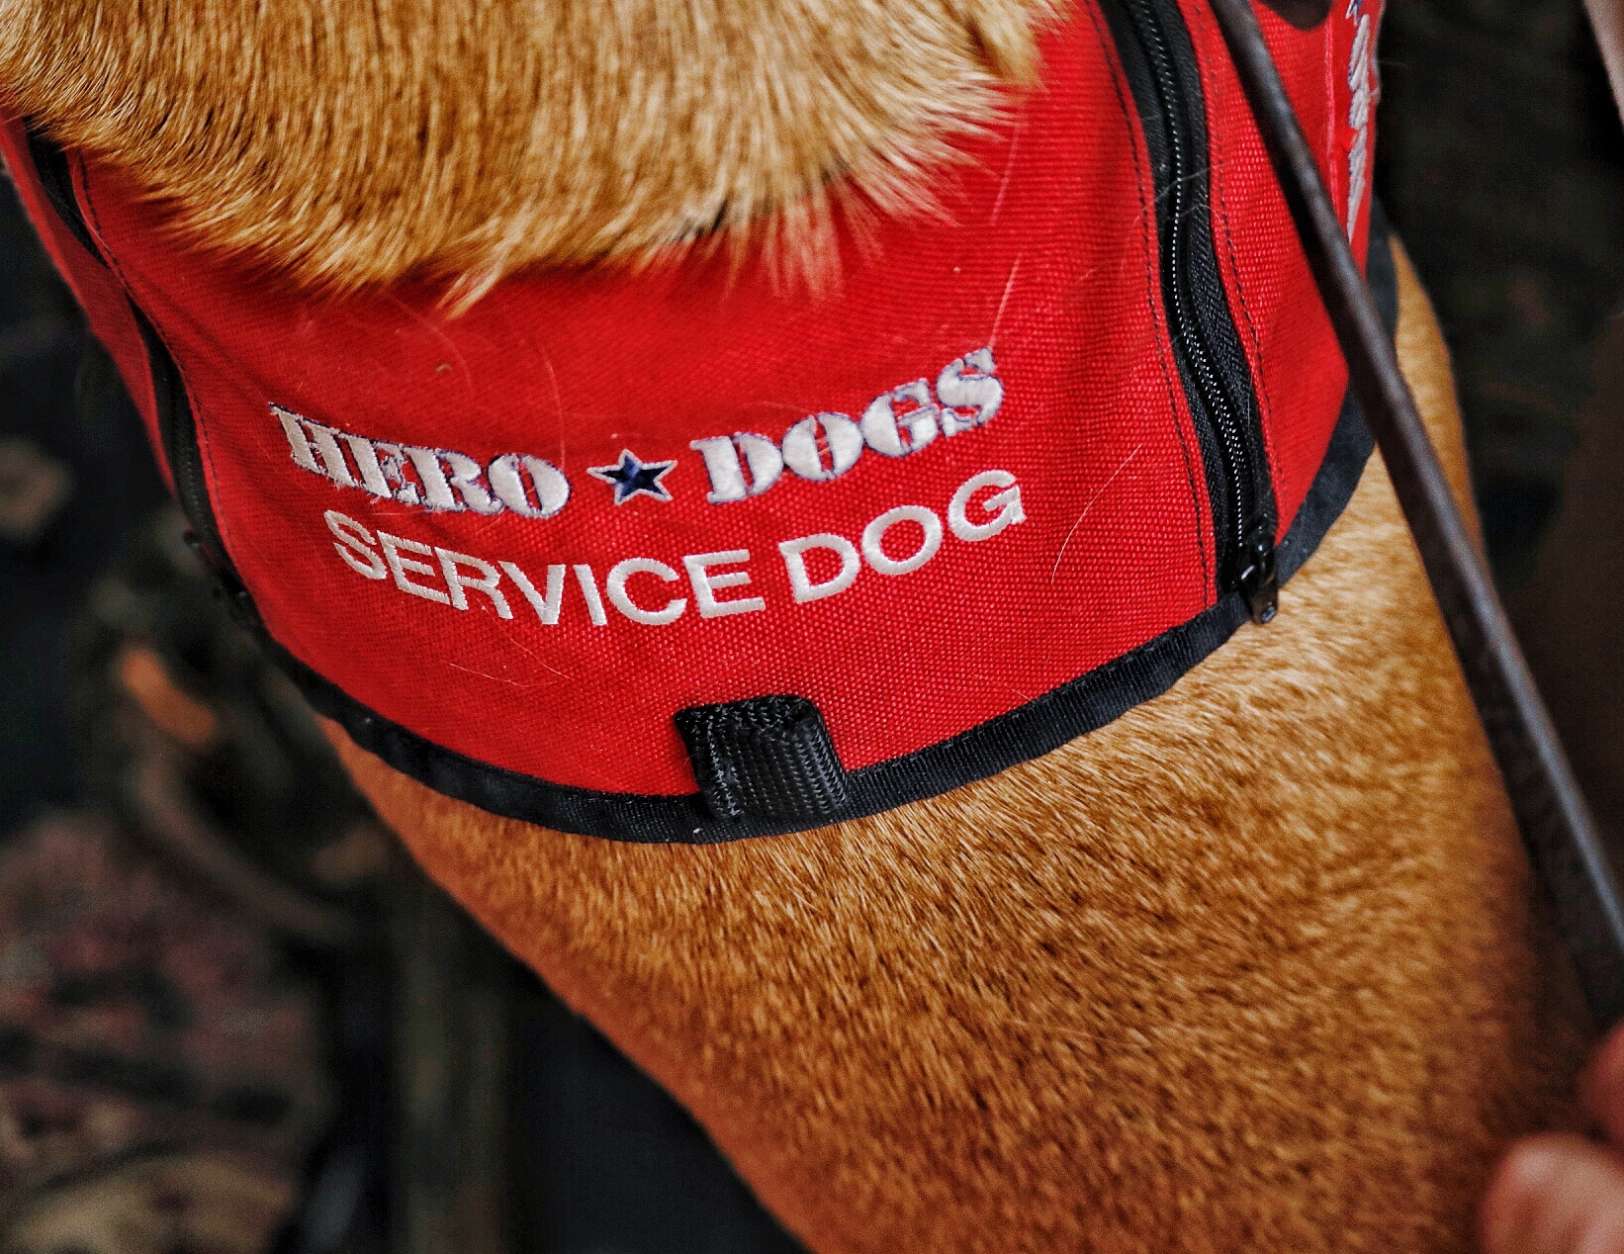 This is Munro's vest. When you see this, resist the urge to pet this handsome dog -- he's busy working alongside his partner, a veteran. Service dogs have been credited with improving the lives of the veterans they are paired with. (WTOP/Kate Ryan)